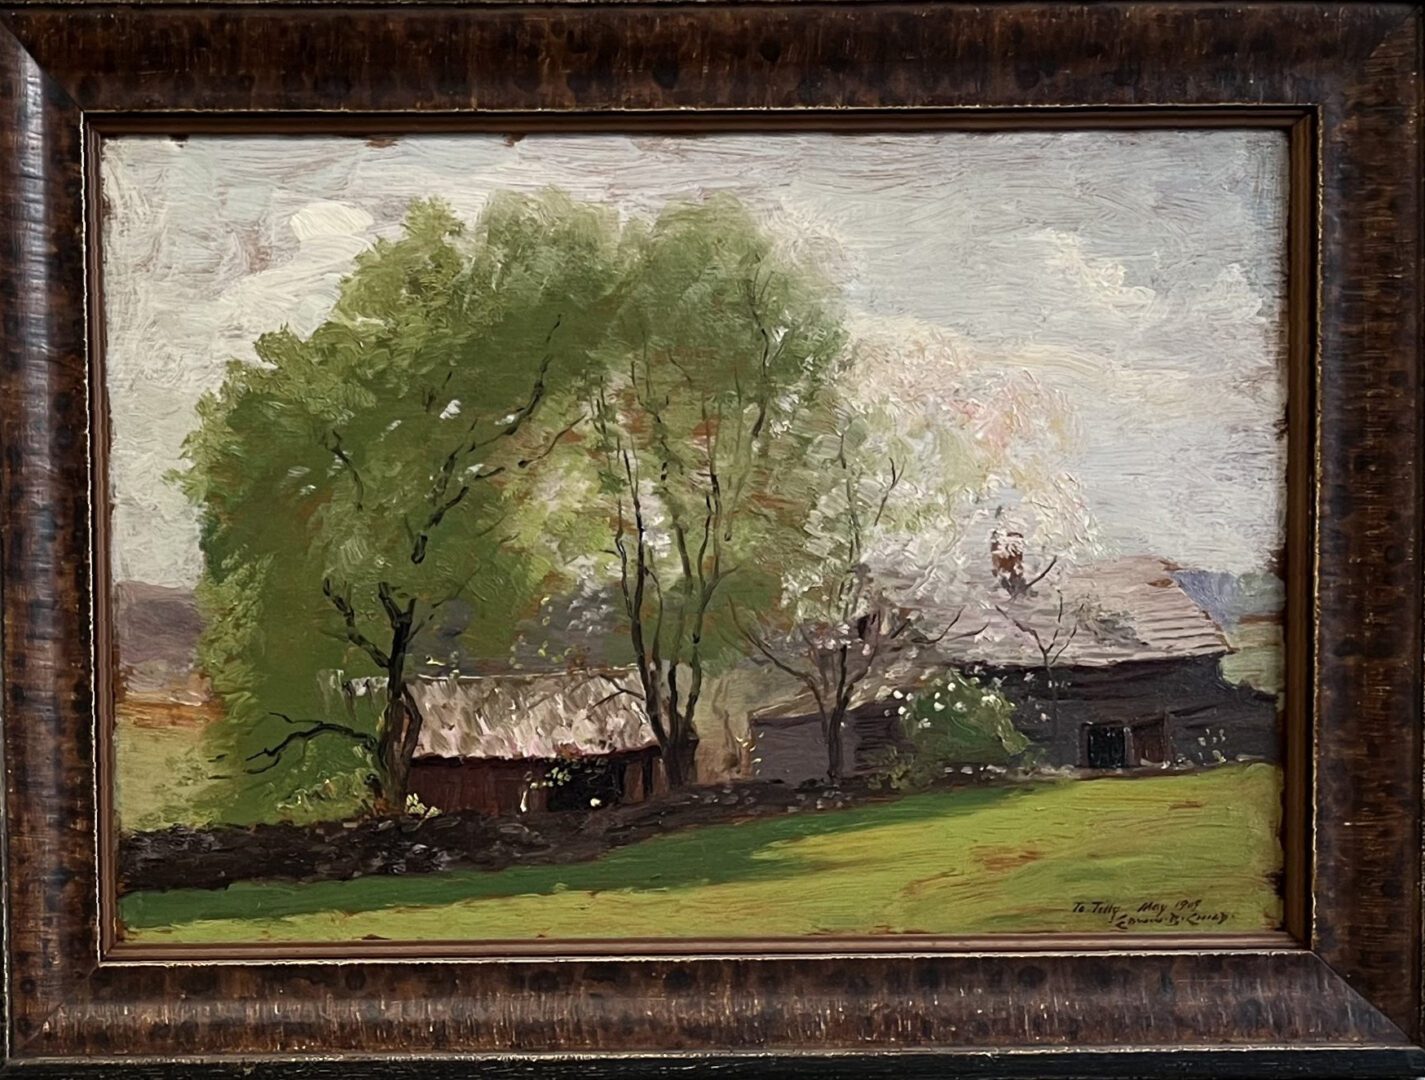 A painting of a farm with trees in the background.